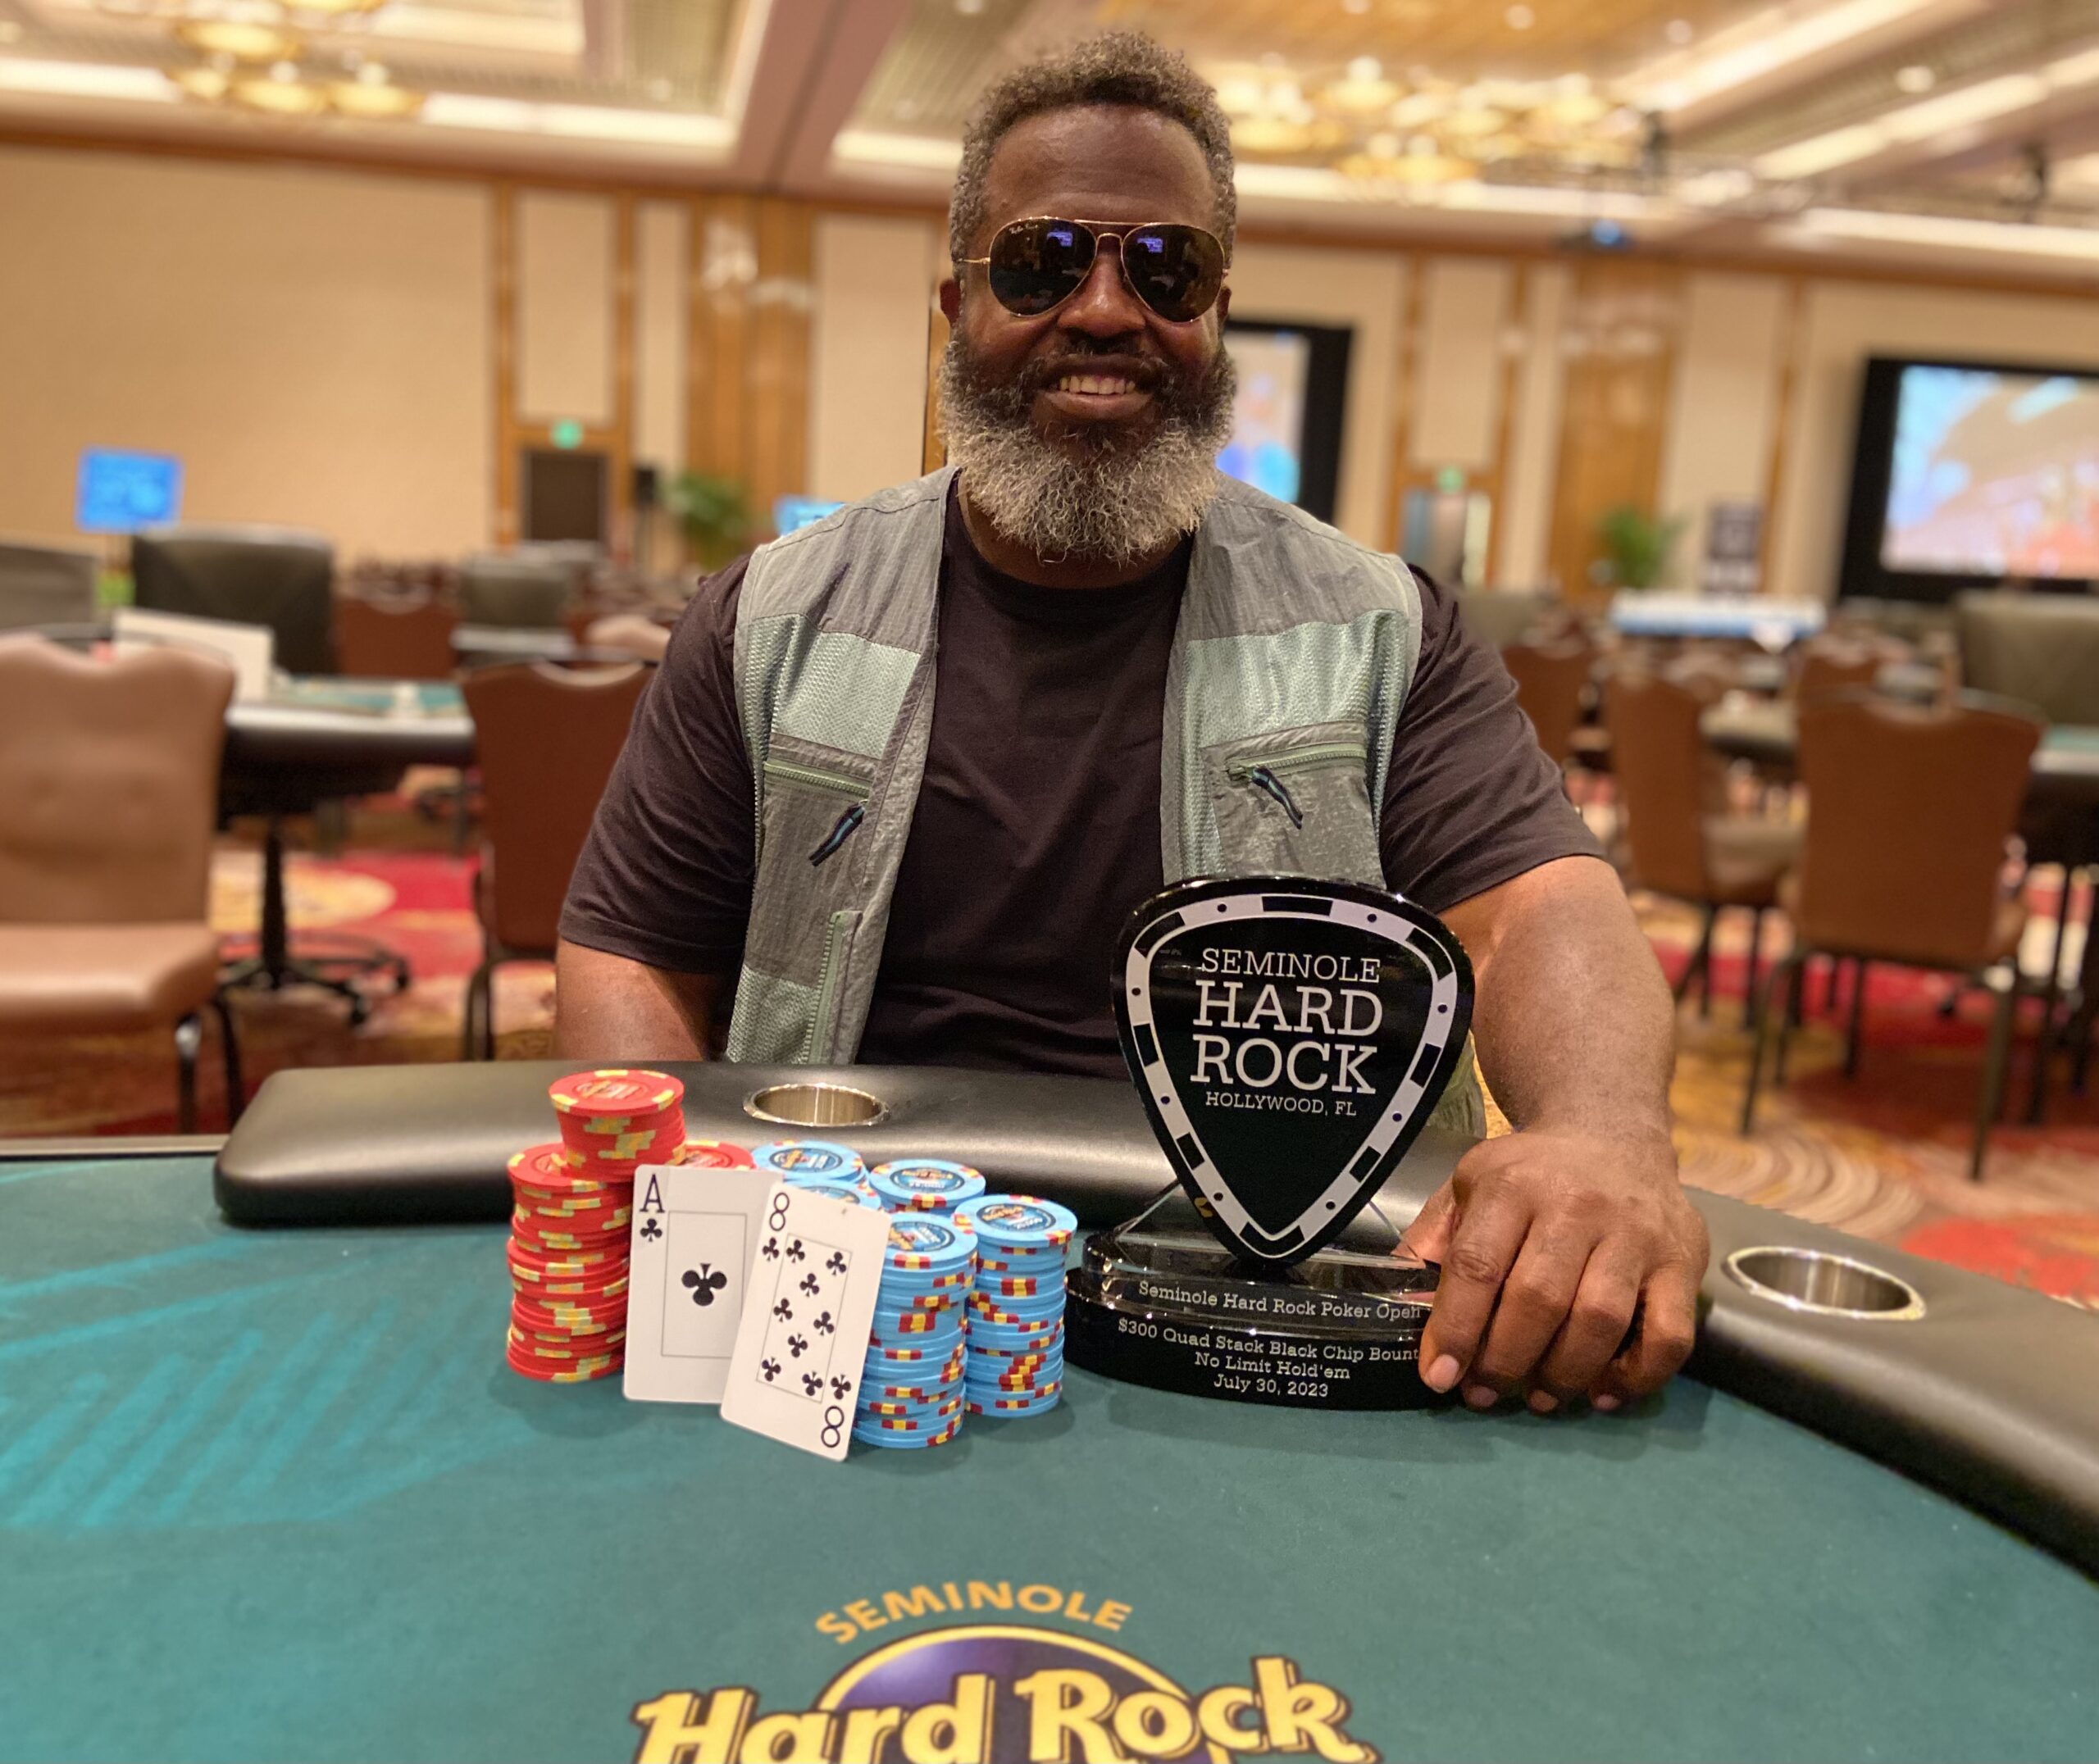 Antuan Bunkley Wins Event 15 of the 2023 Seminole Acid Rock Poker Open in Four-Way Deal for $8,239